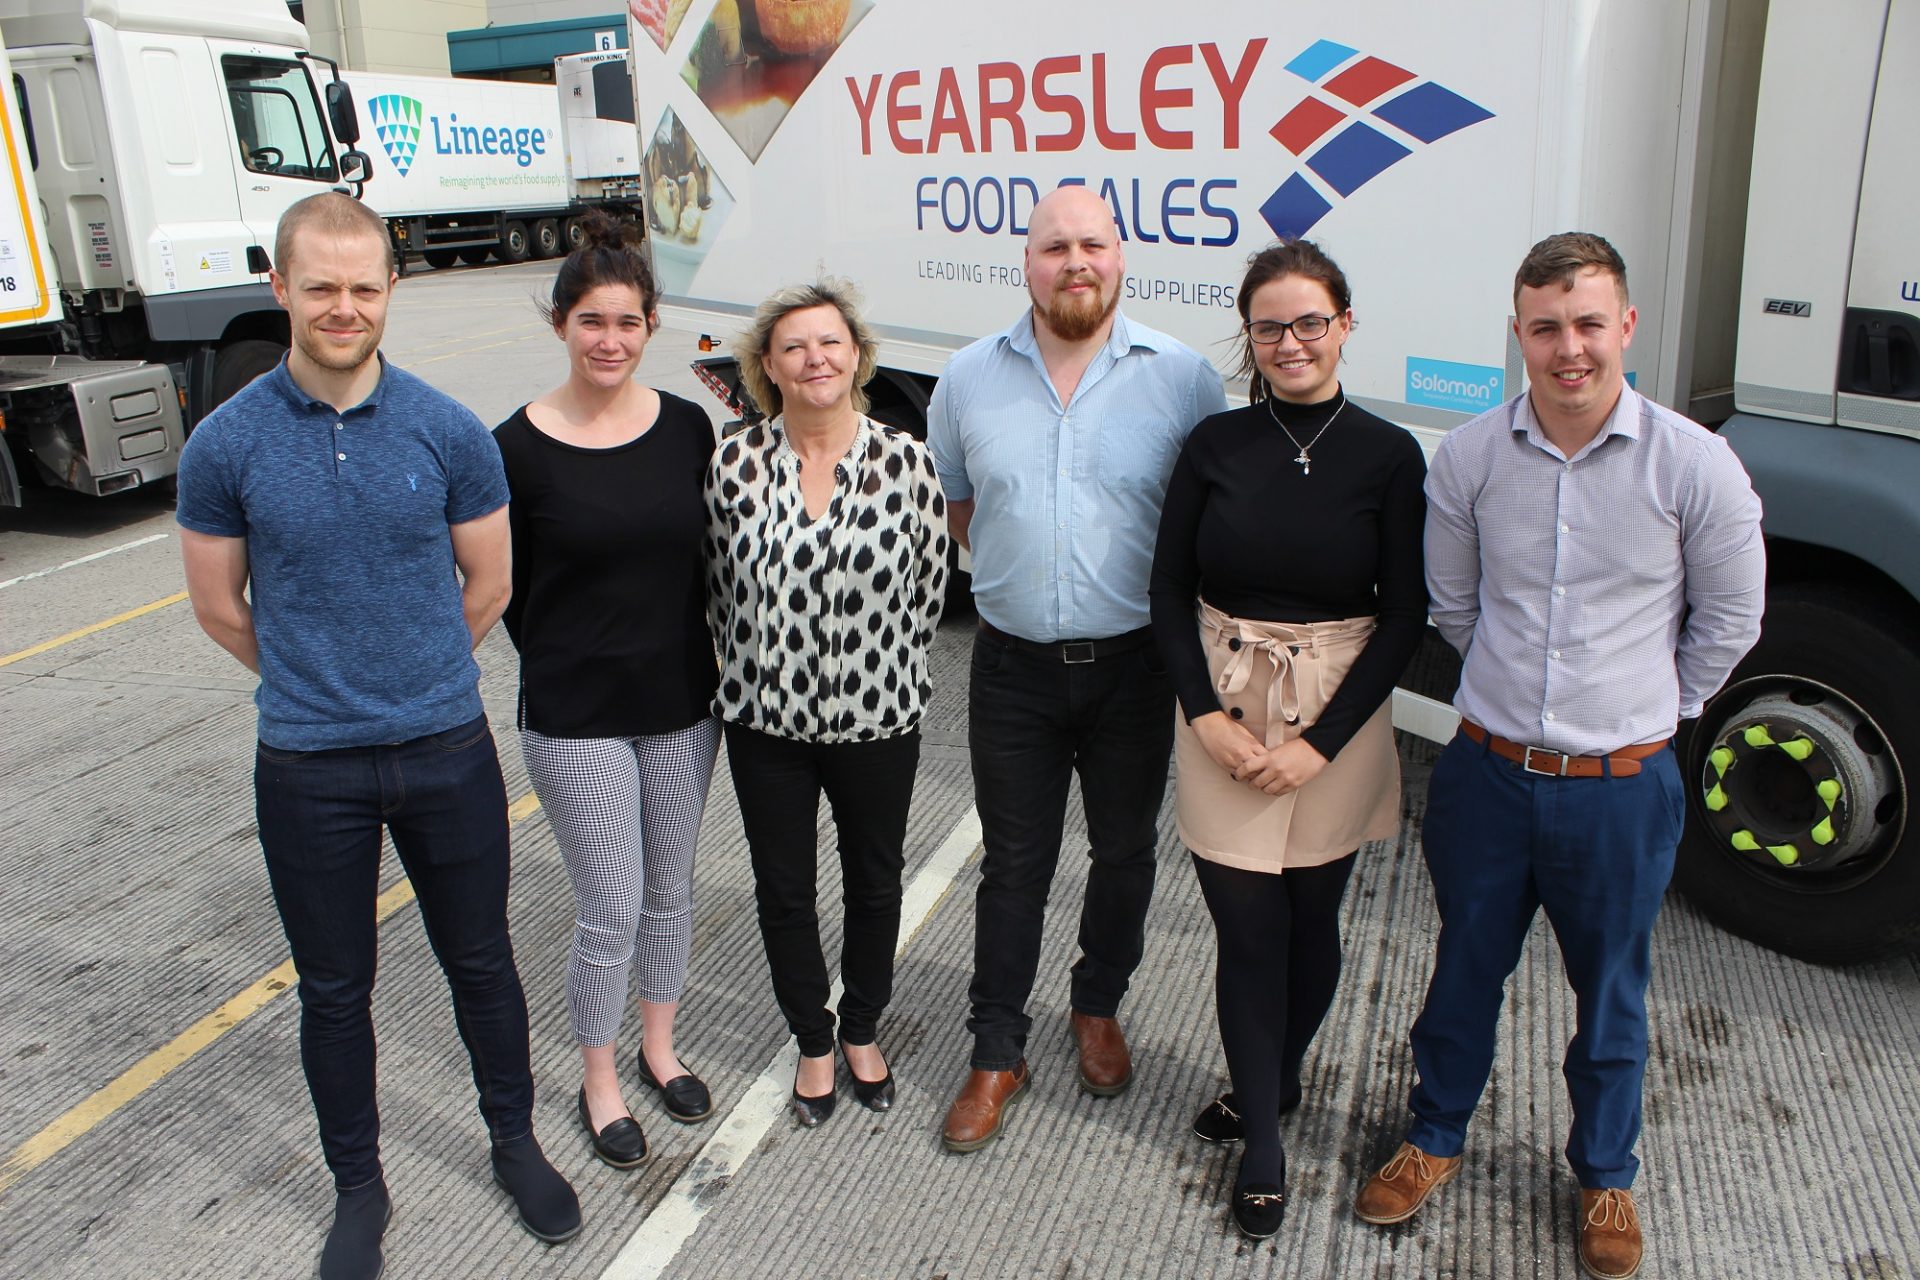 Staff stood in front of Yearsley Food truck